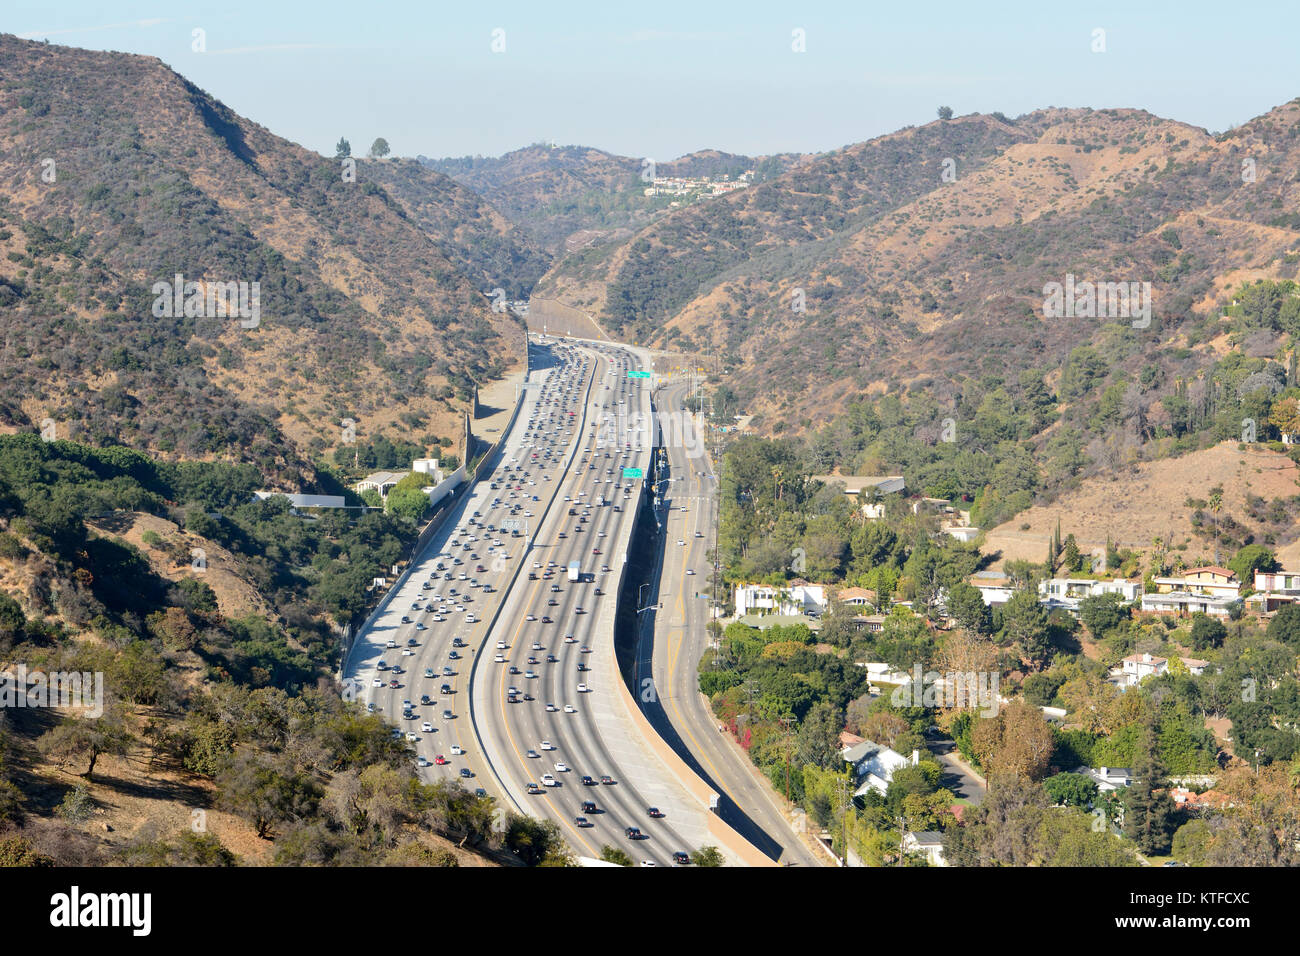 View over San Diego freeway in Los Angeles, California. Stock Photo